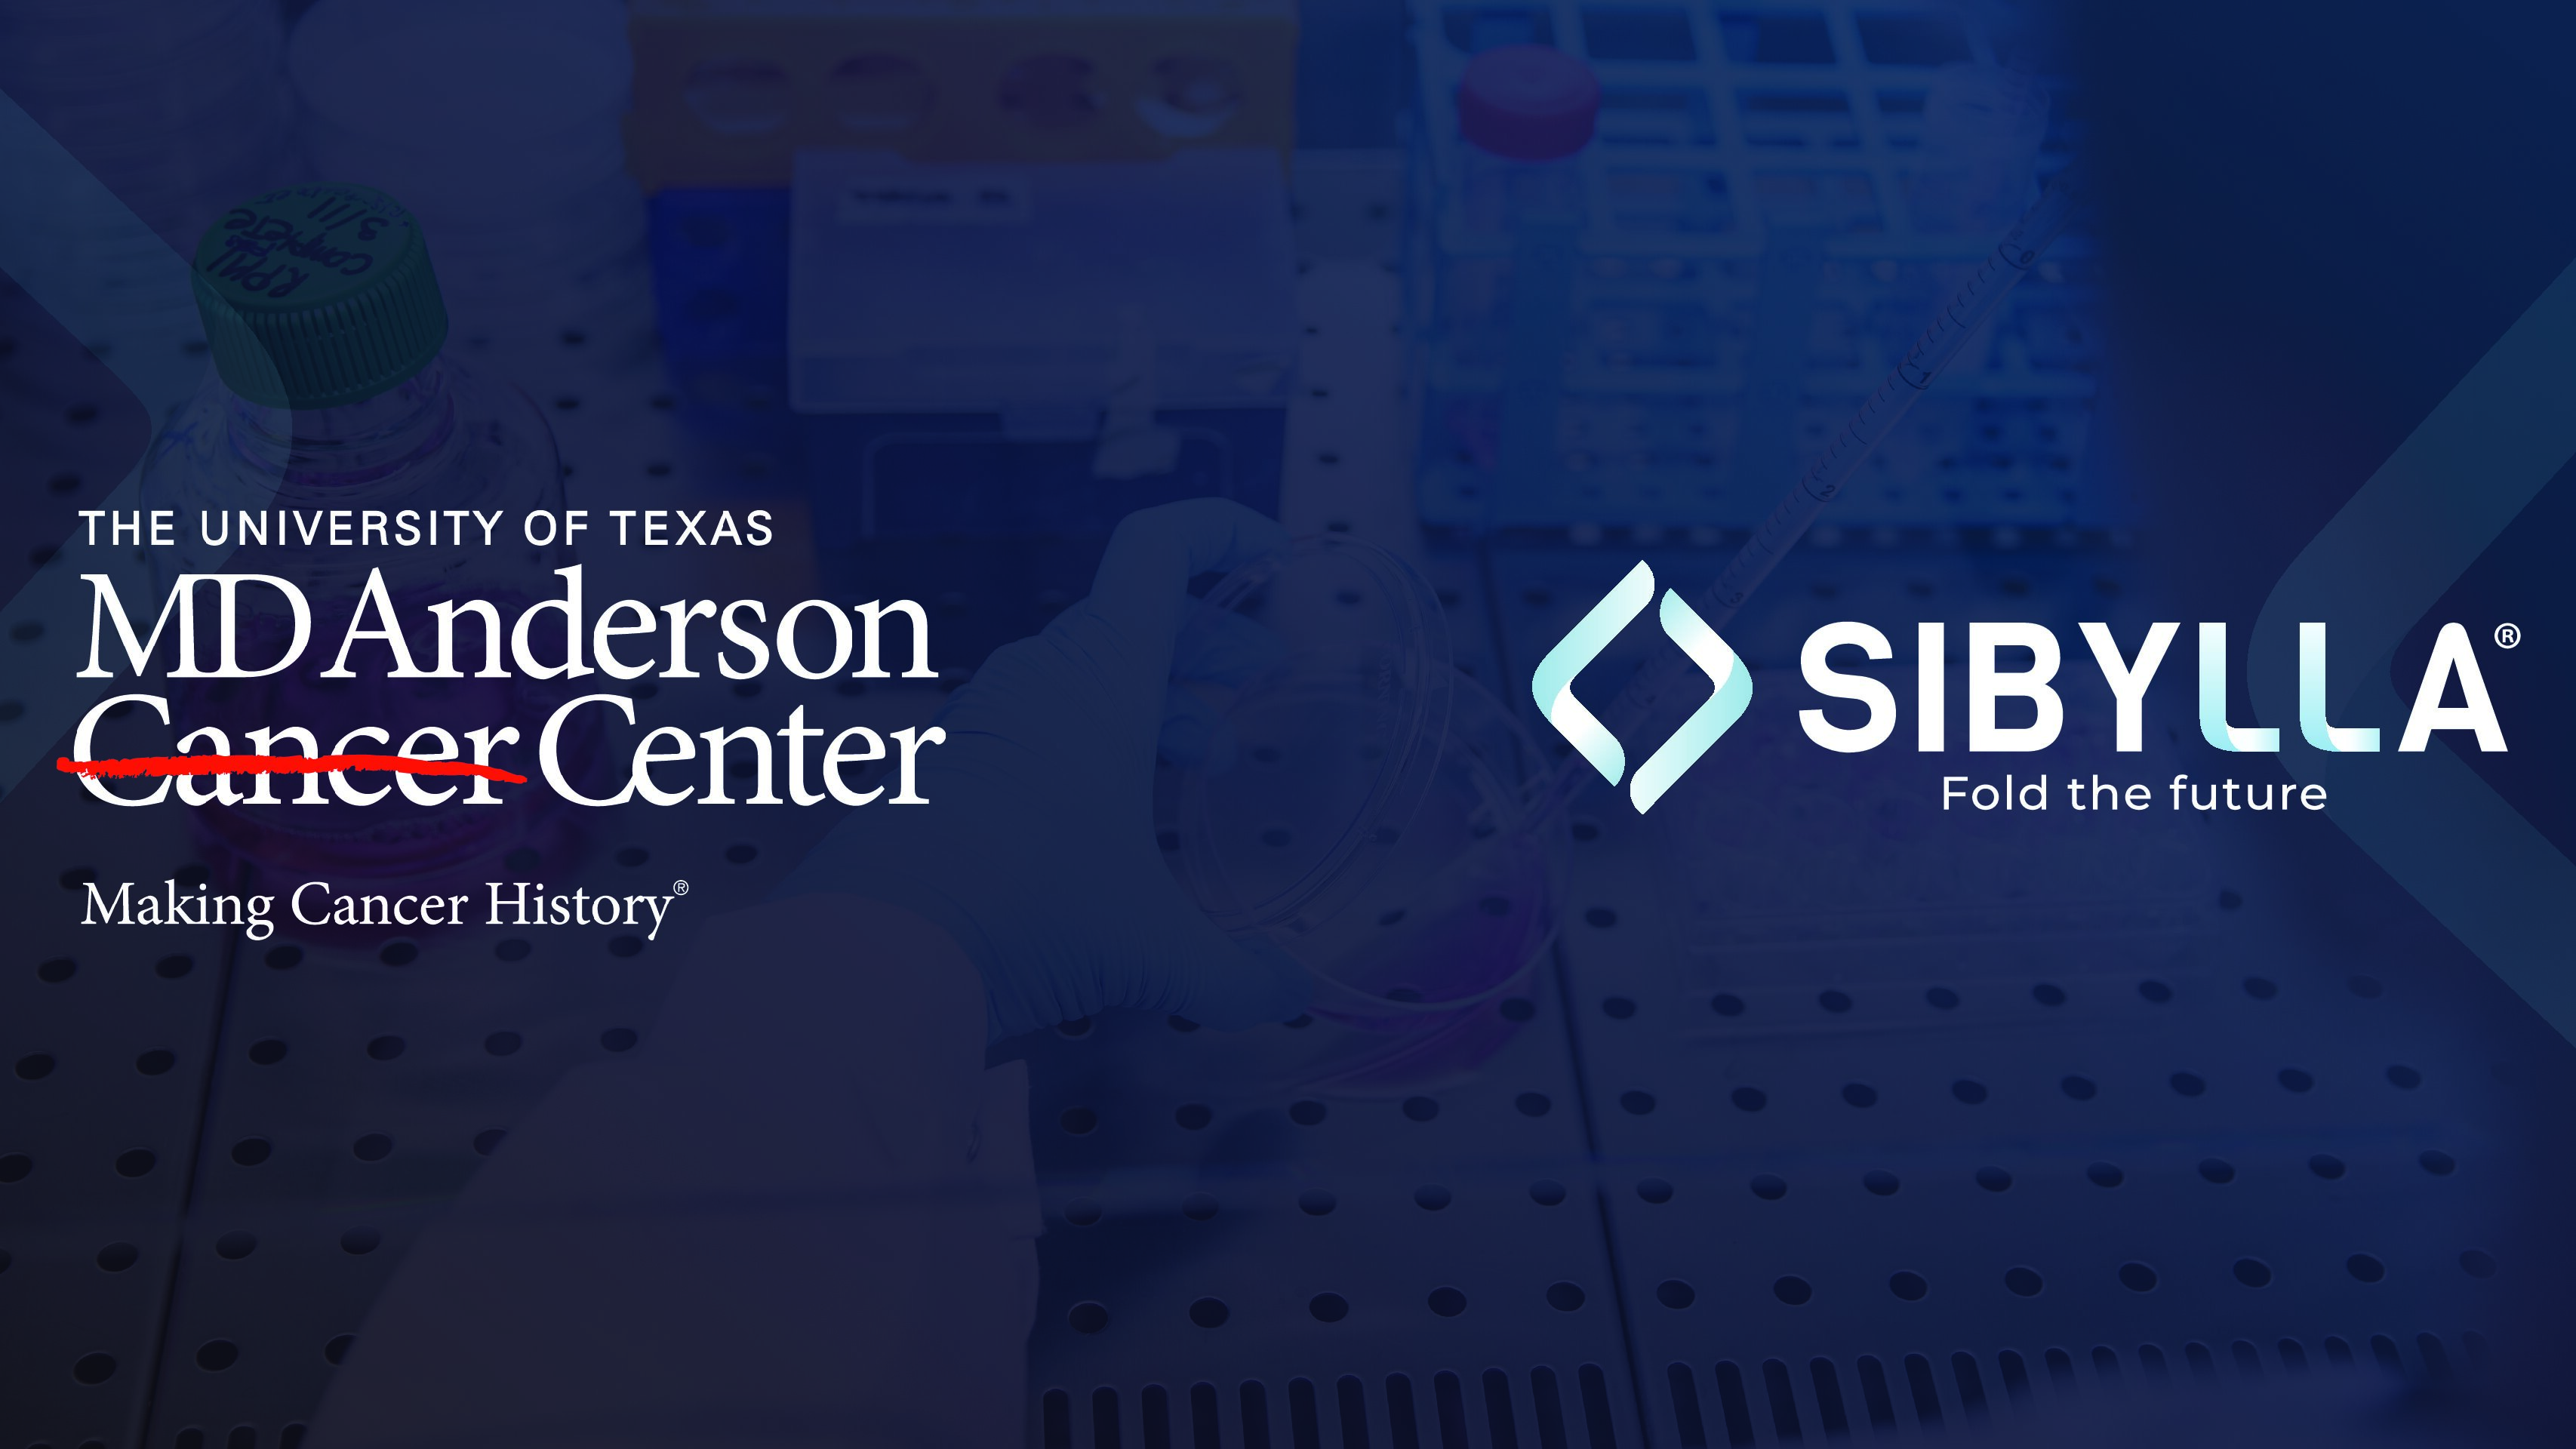 Sibylla Biotech and MD Anderson Announce Strategic Collaboration to Discover and Develop Small-Molecule Protein Degraders